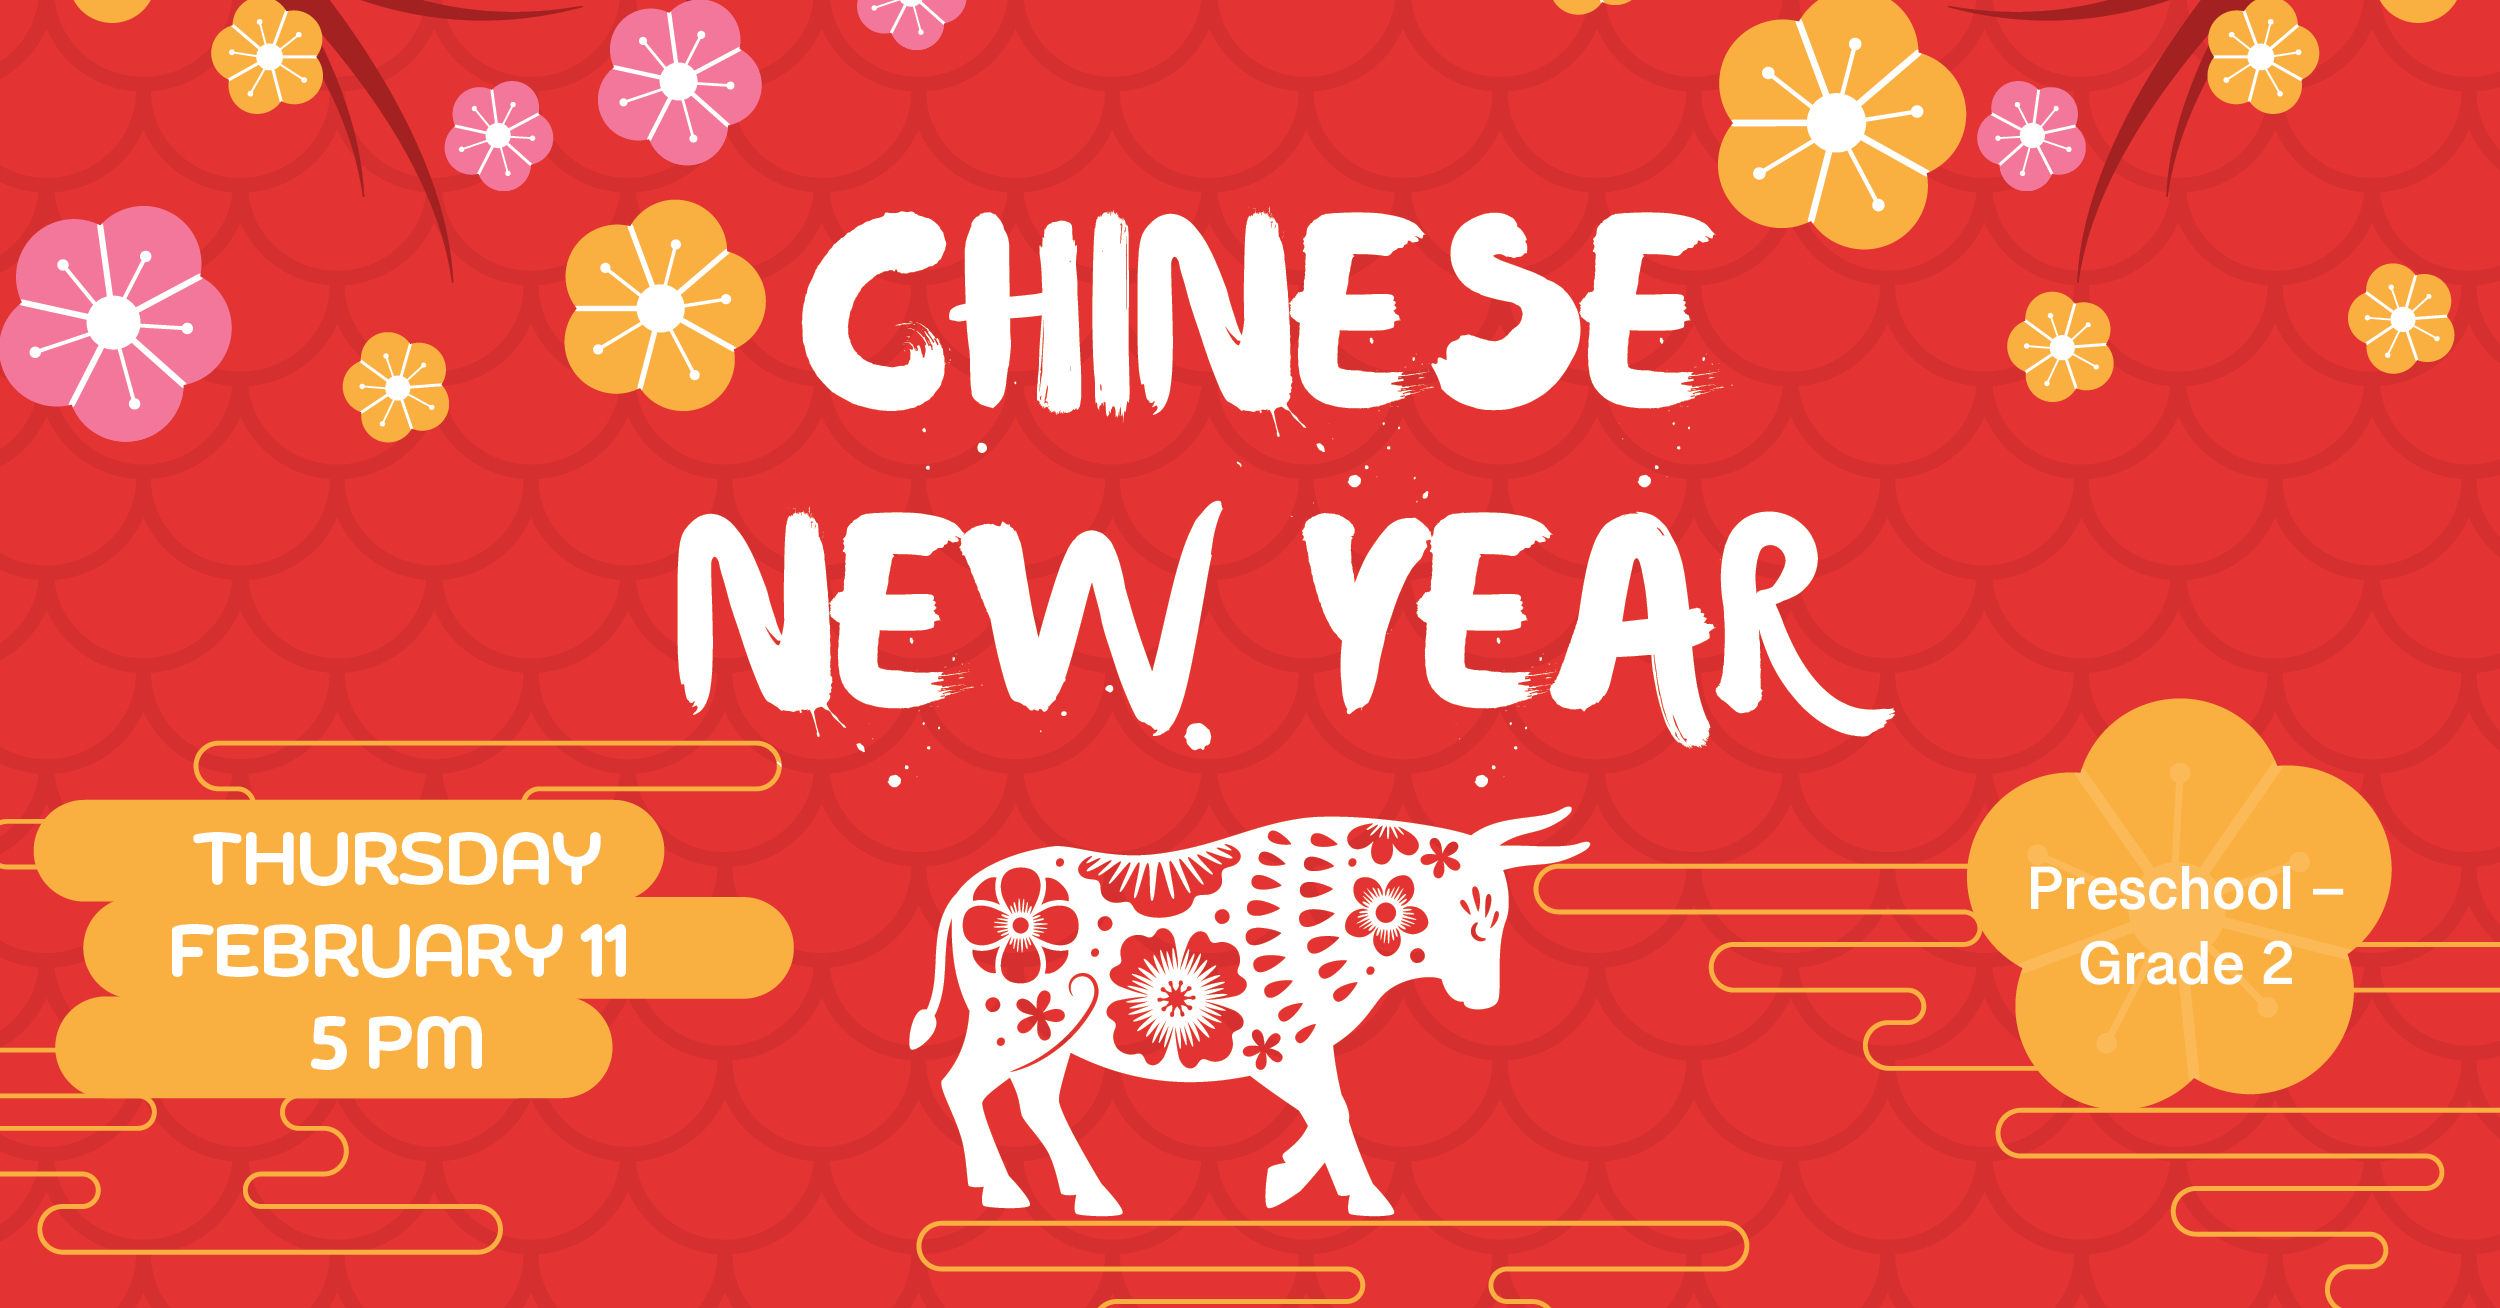 Chinese New Year Thursday, February 11 at 5pm. Preschool to Grade 2